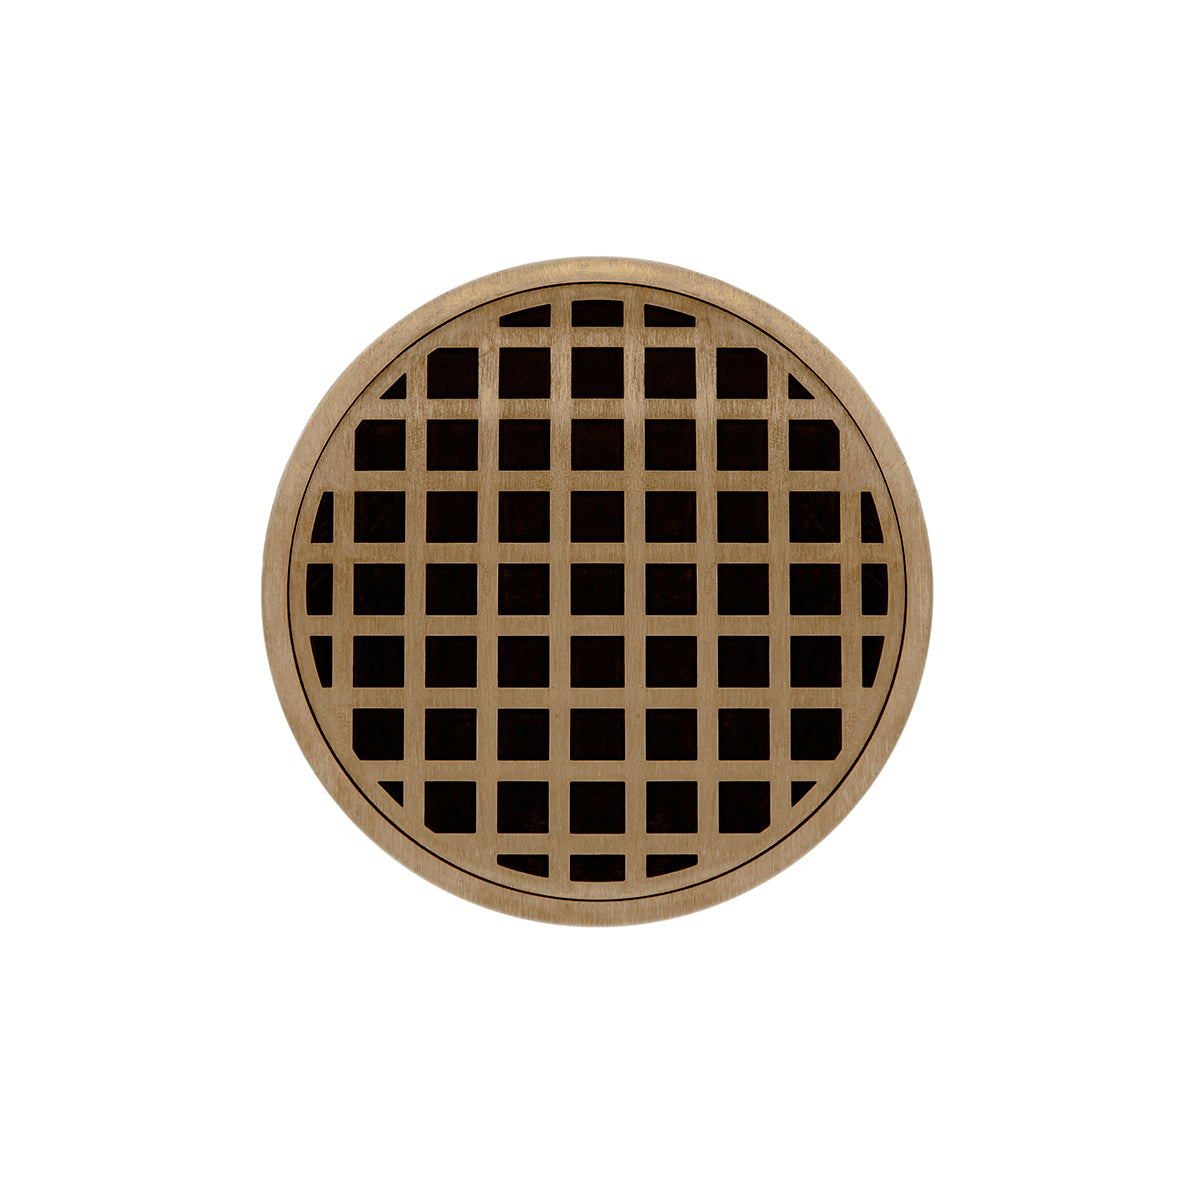 Infinity Drain 5" Round RQD 5 Premium Center Drain Kit with Squares Pattern Decorative Plate with PVC Drain Body, 2" Outlet